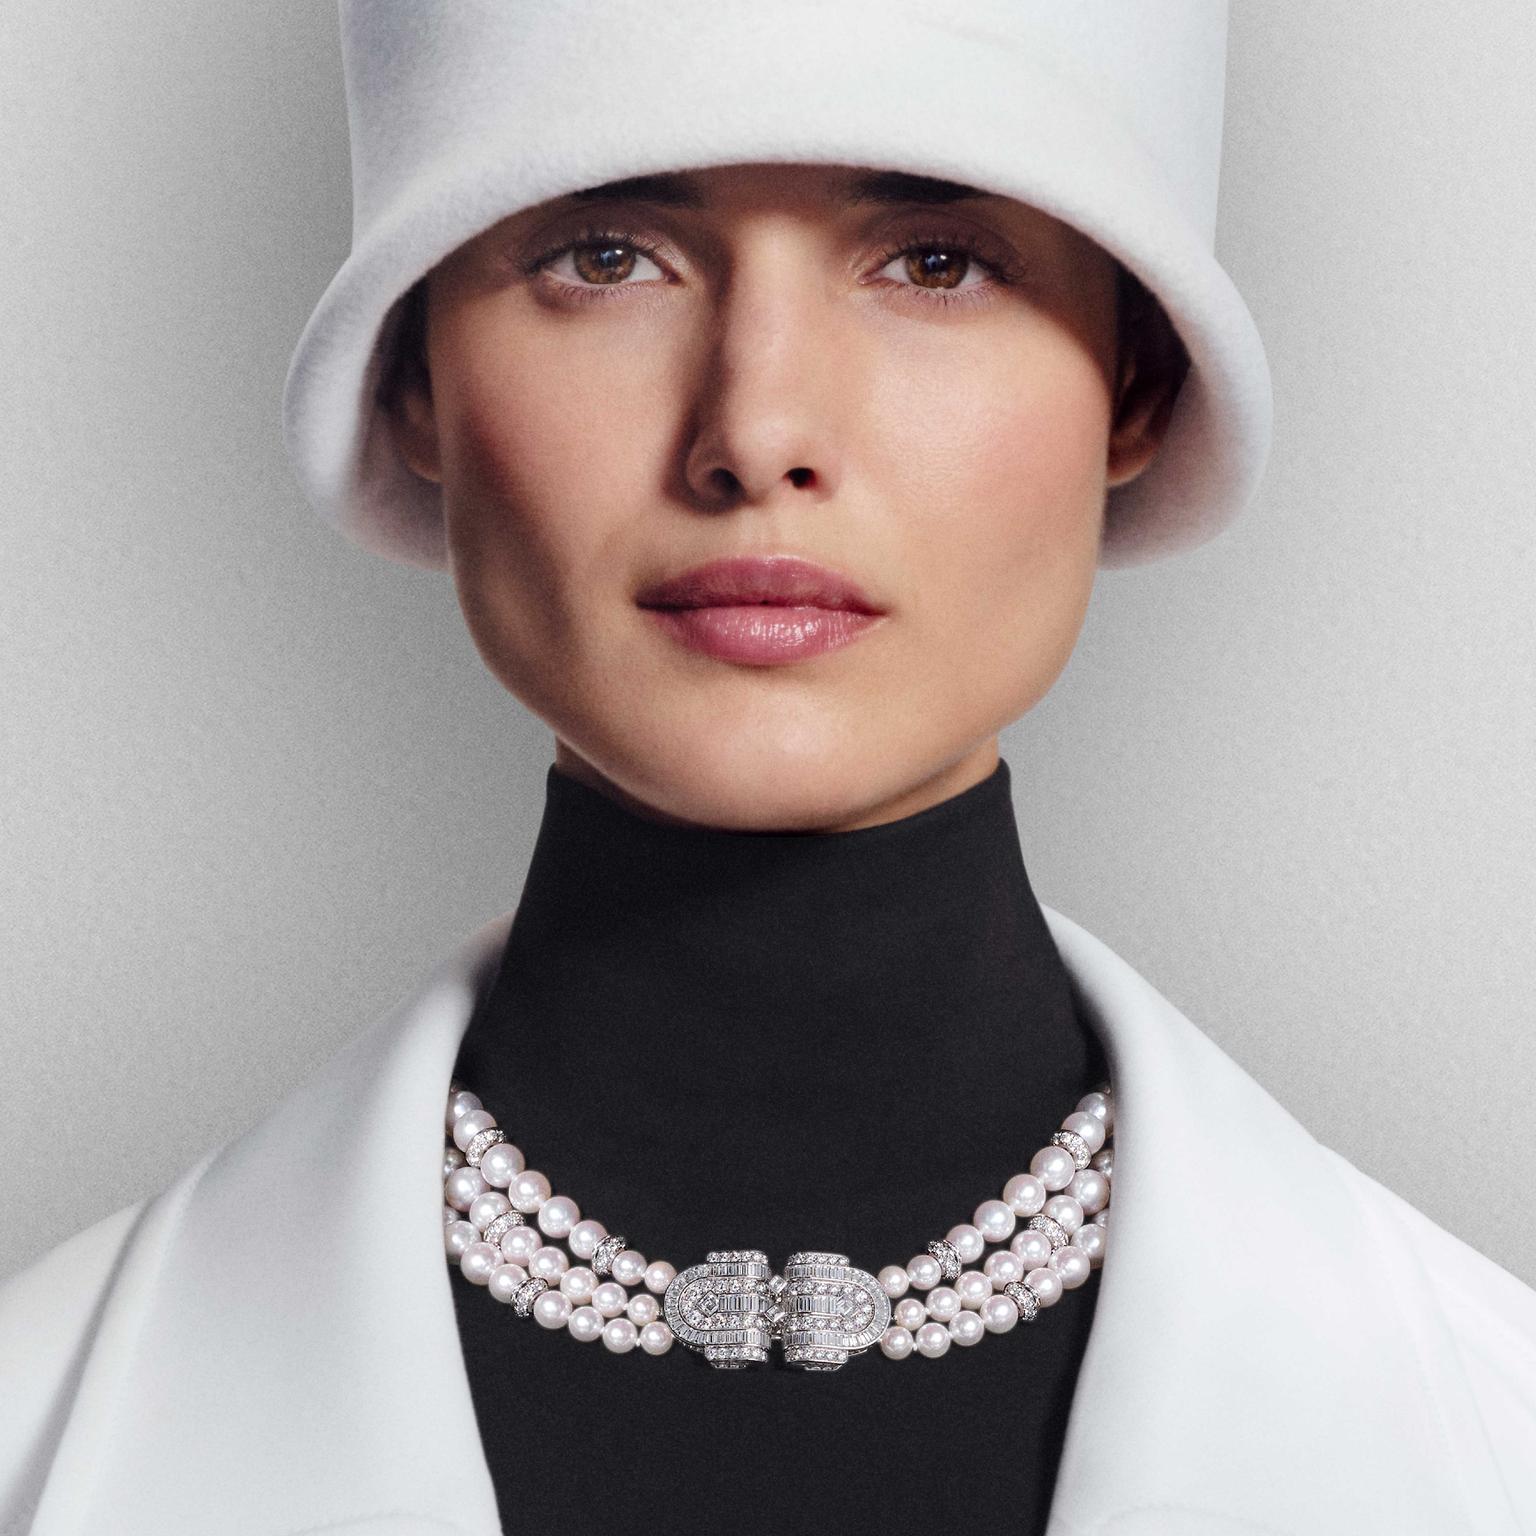 Paris Collections: The high jewelry market is on a high